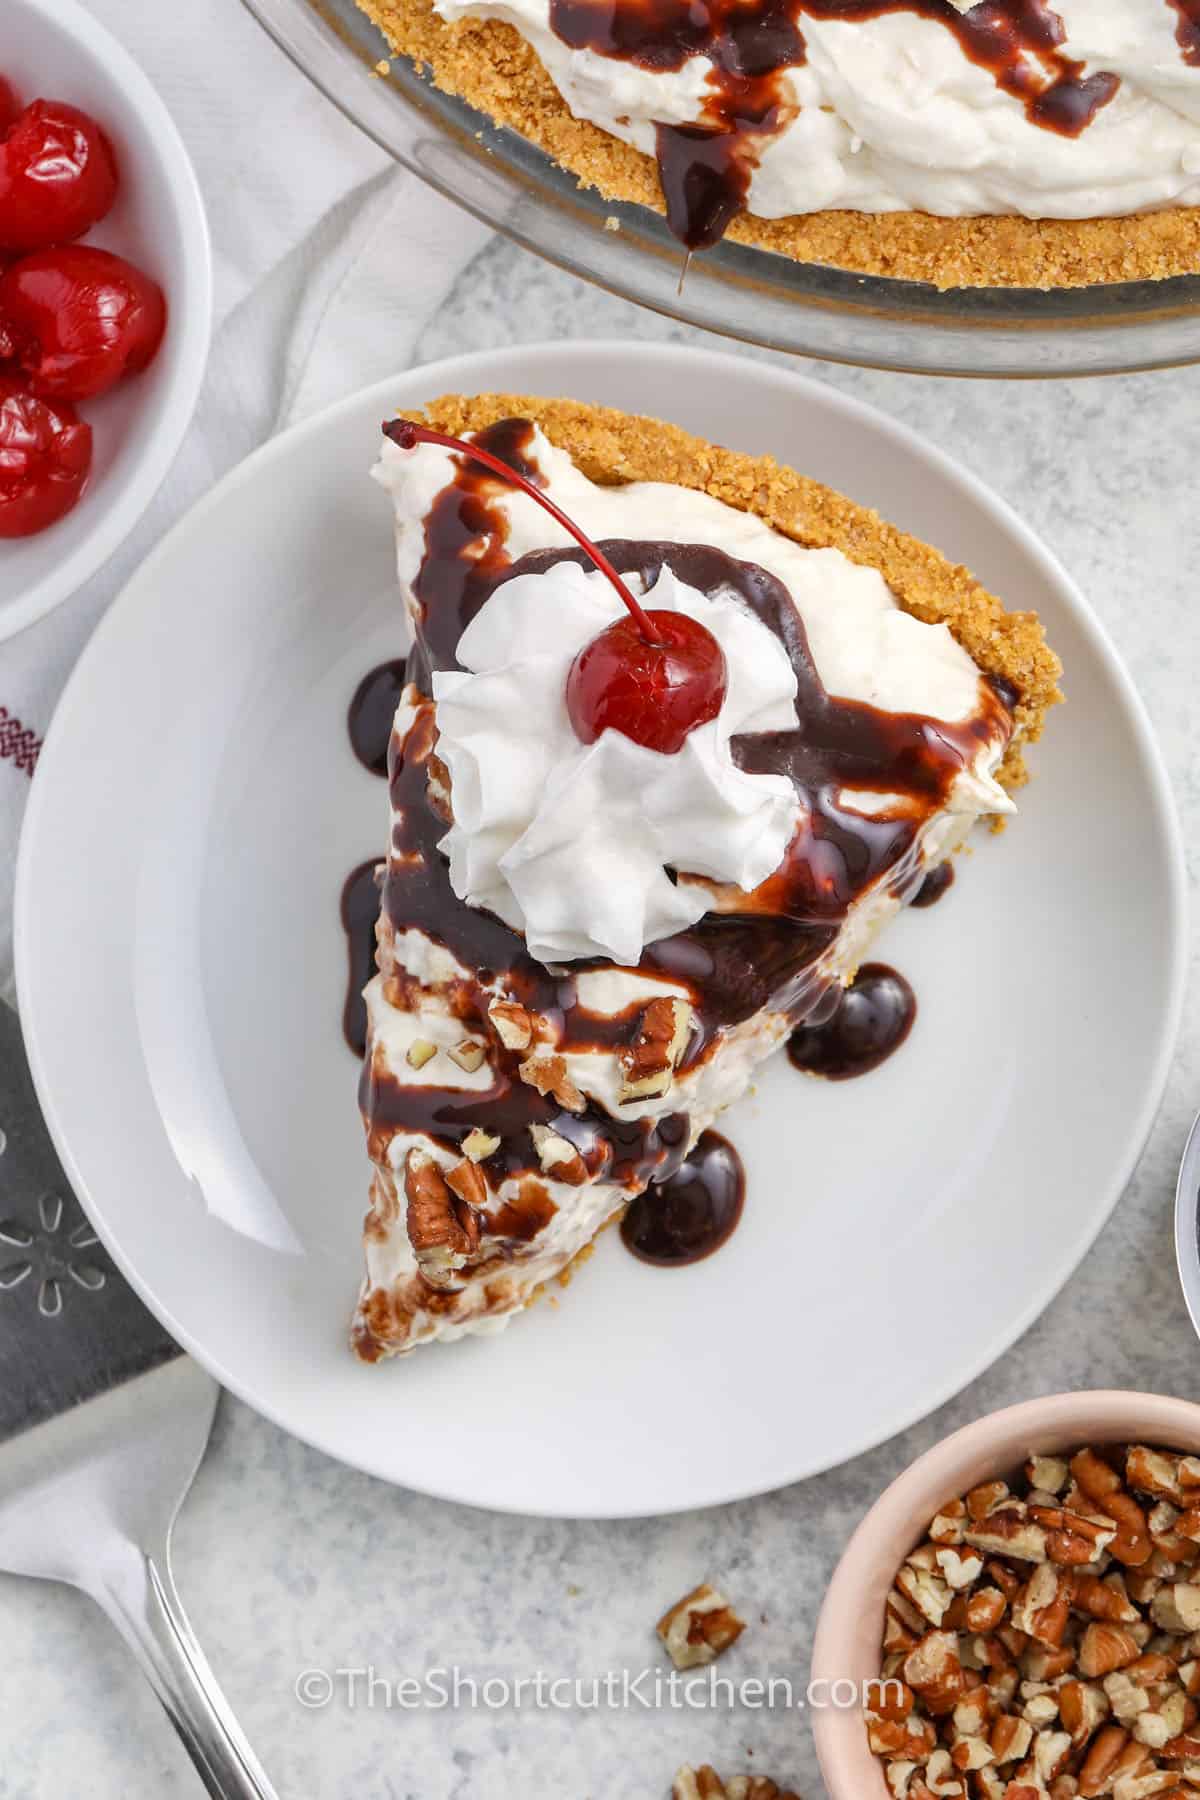 Banana Split Pie slice with chocolate syrup , whipped topping and cherry on top